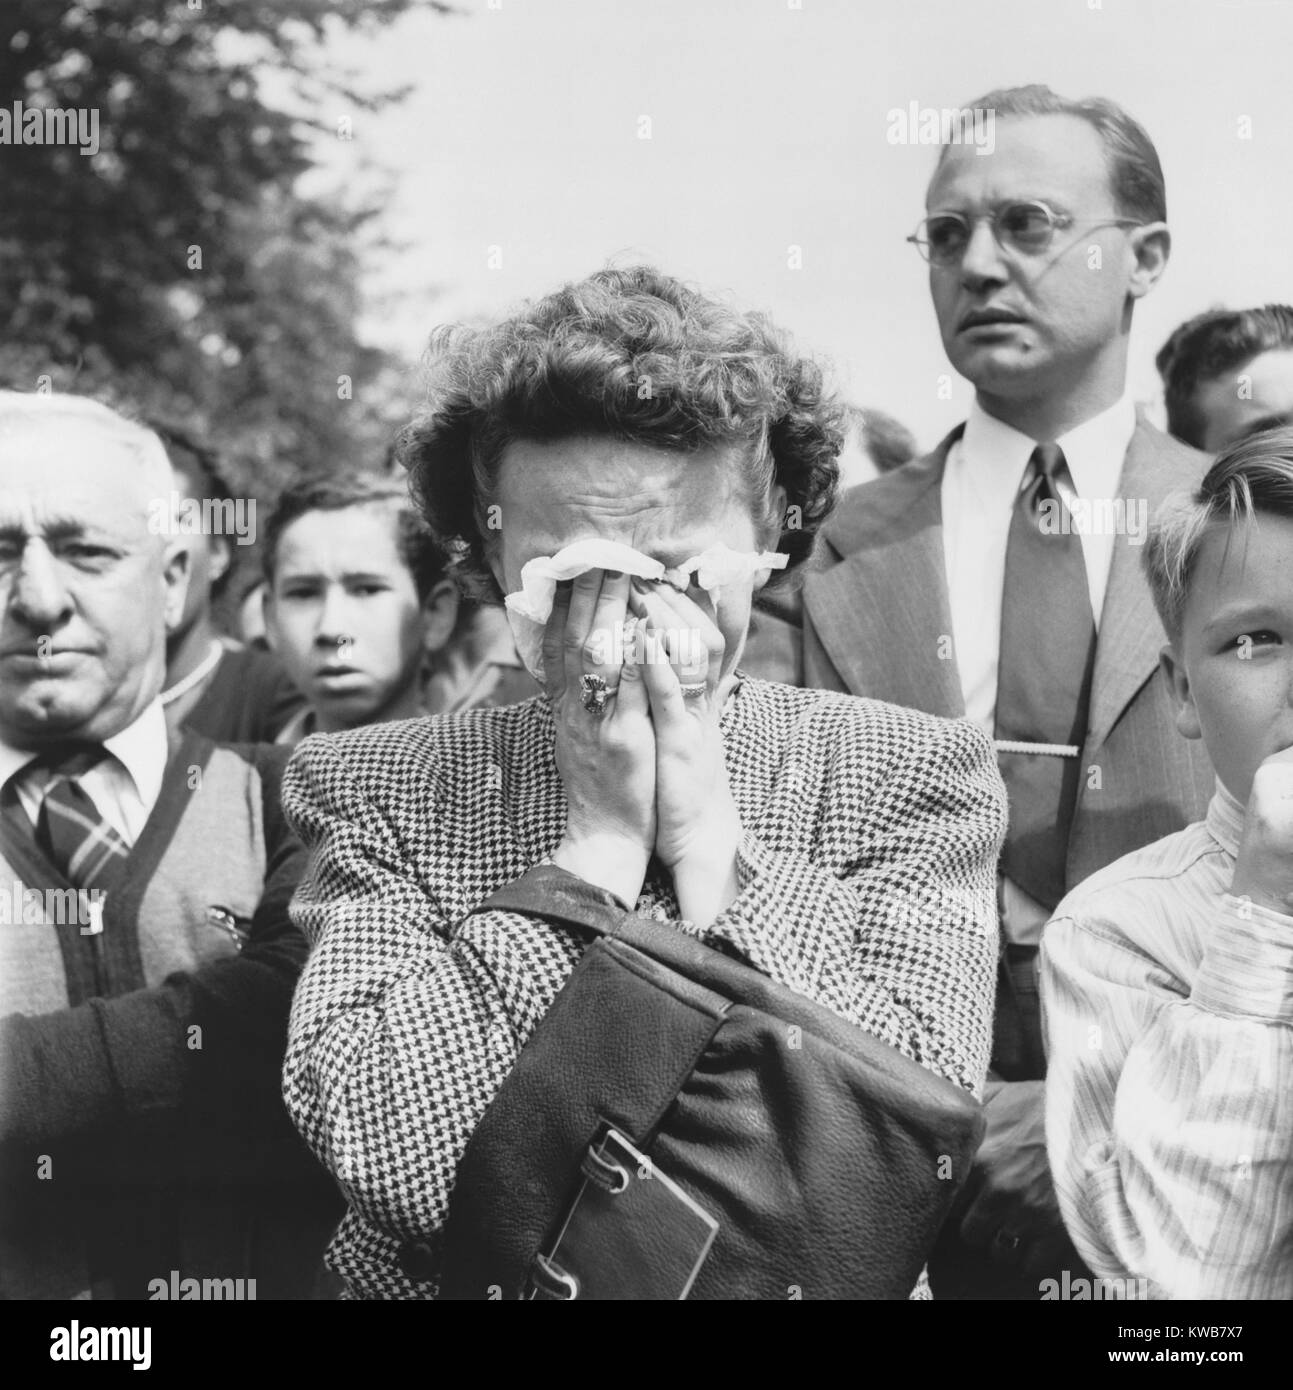 Woman weeps into her handkerchief at the funeral of President Franklin Roosevelt. Washington, D.C. April 14, 1945. World War 2. (BSLOC 2014 8 187) Stock Photo